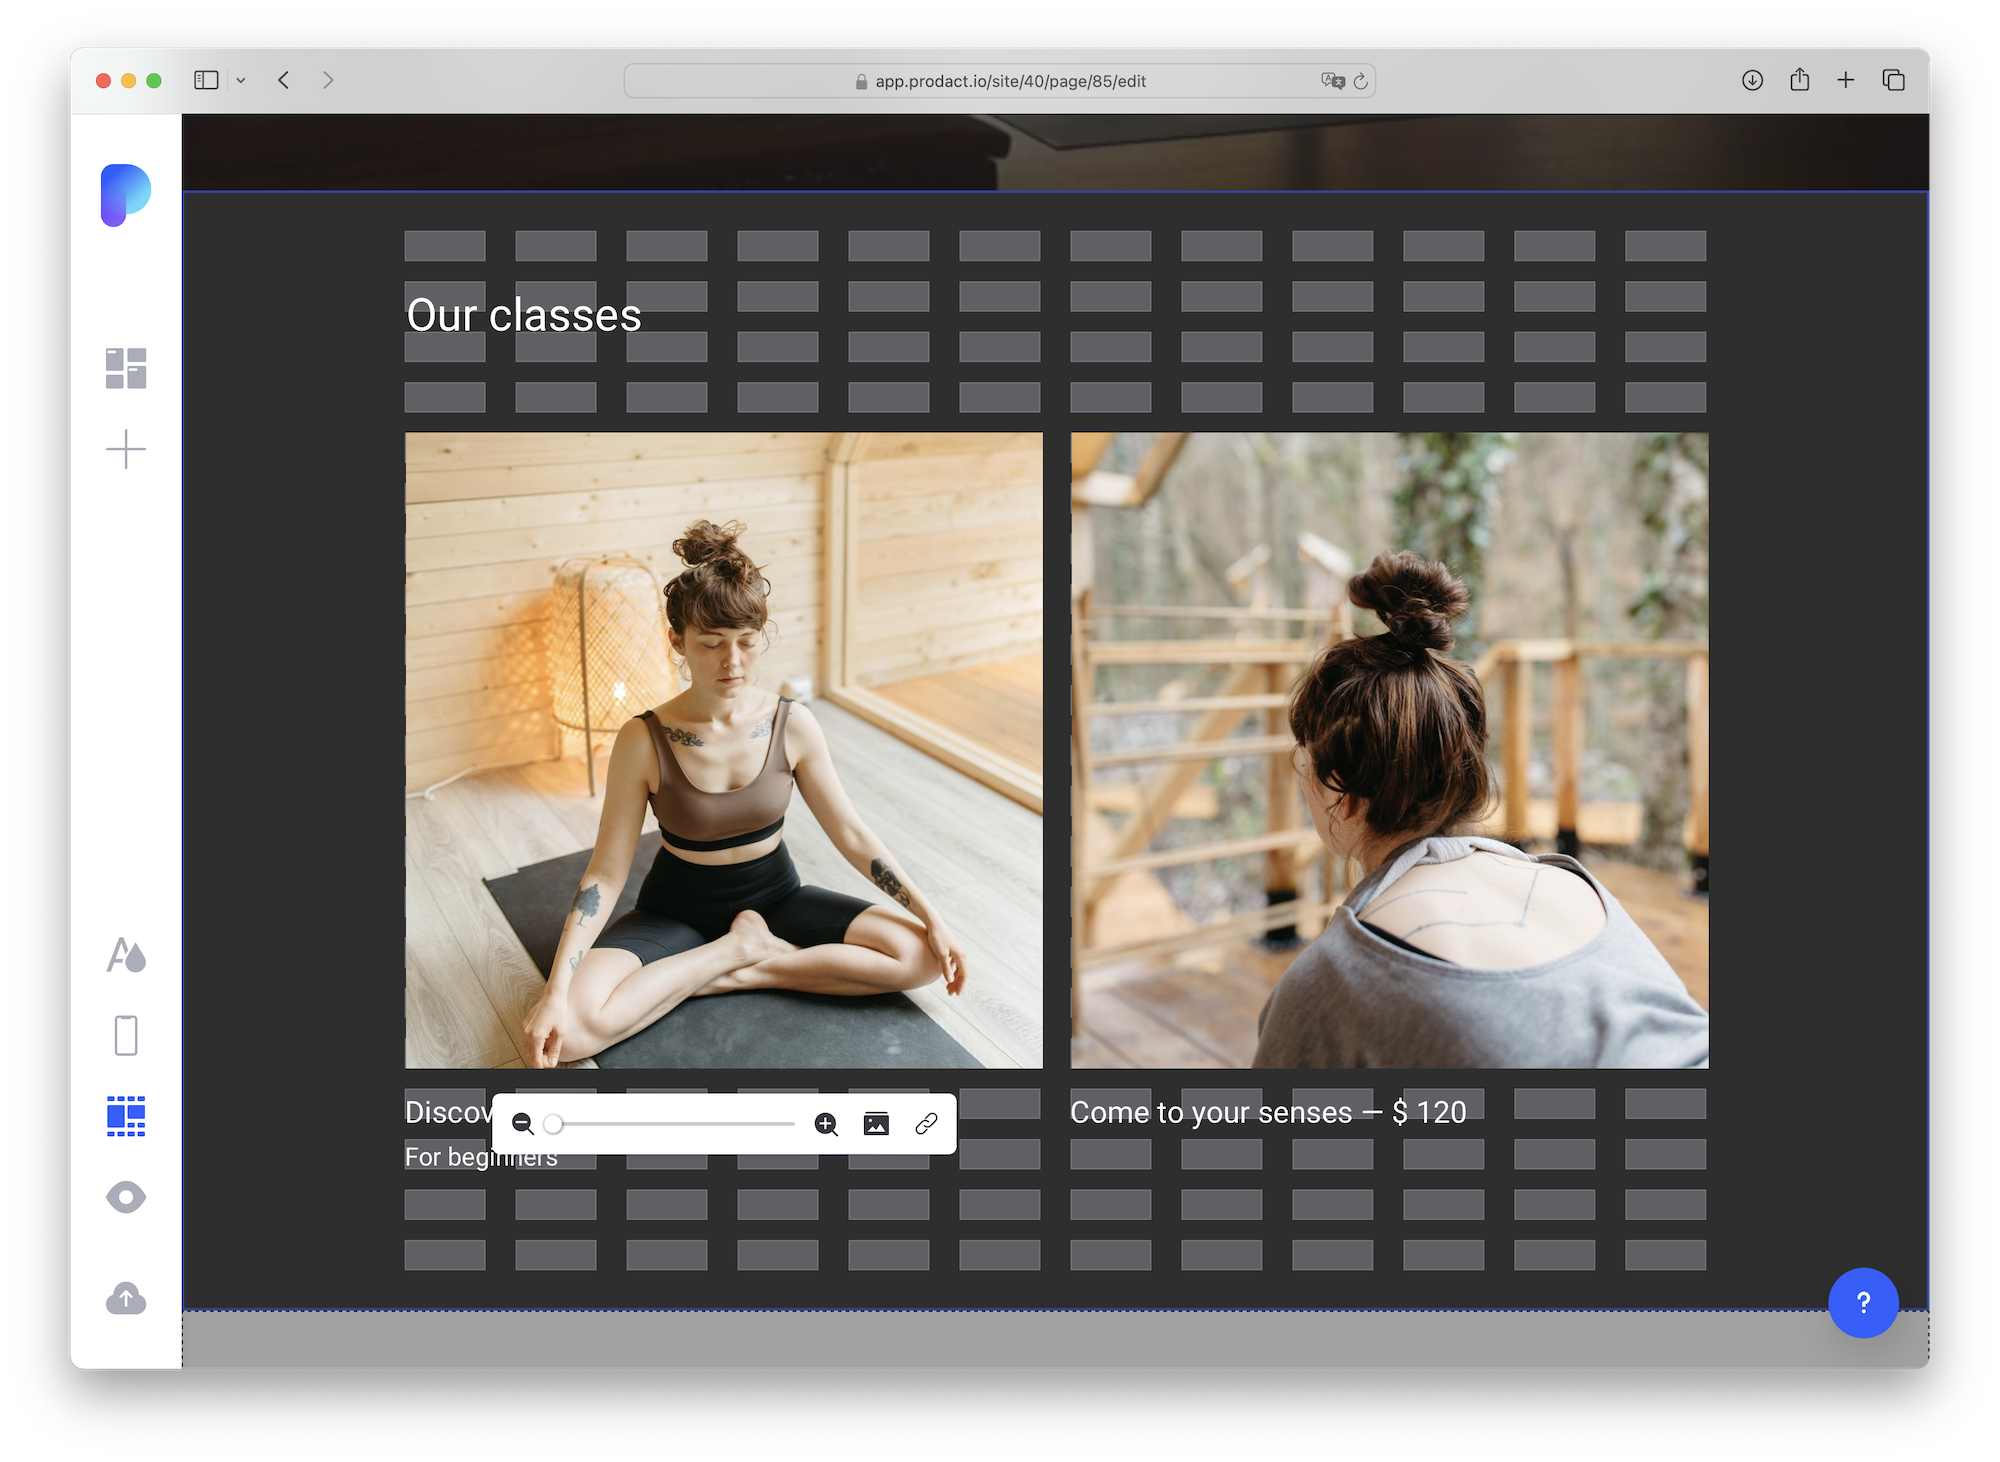 Switch between three editing modes: Free Mode for moving elements around the site, Grid Mode for adding and arranging elements on a grid, and Edit Mode for changing texts and images.